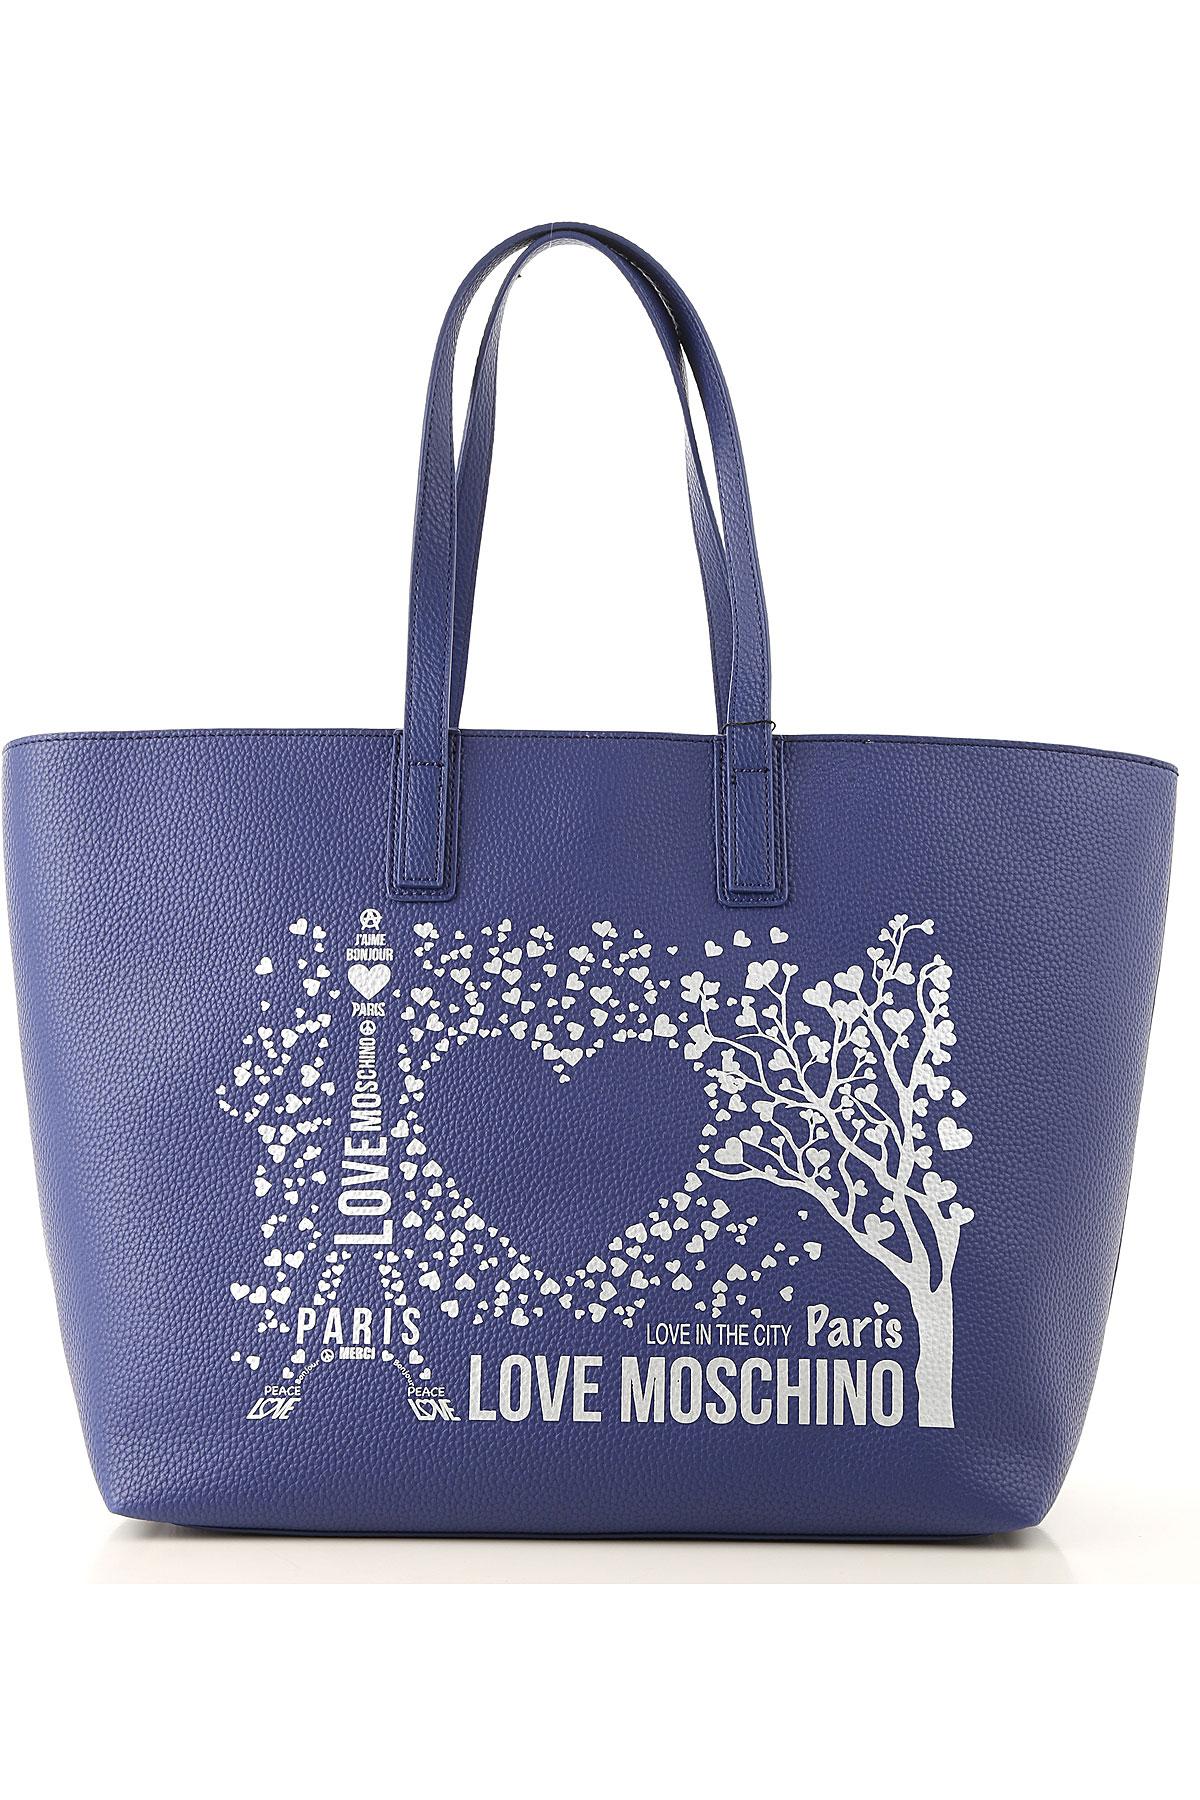 Moschino Tote Bag On Sale in Deep Blue 